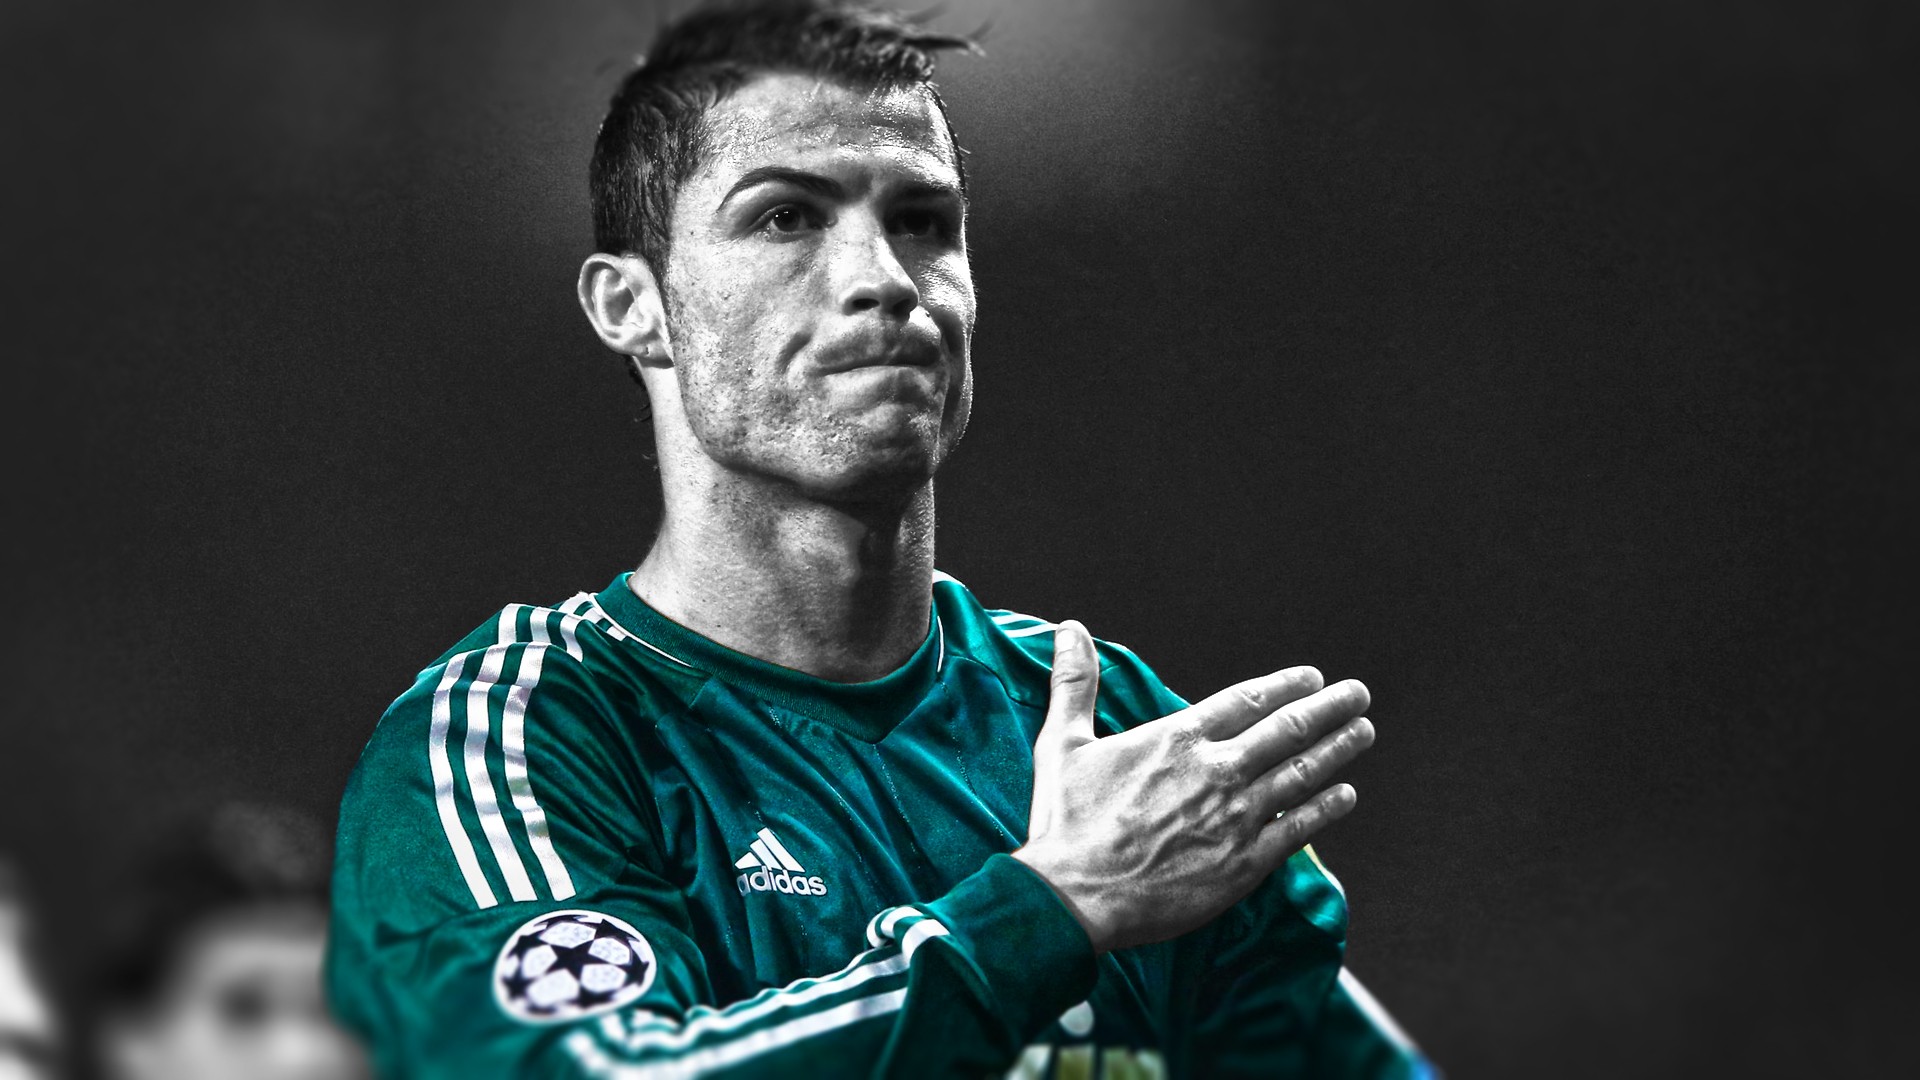 Cristiano Ronaldo HD Wallpapers 2015 Right Click Save Target As